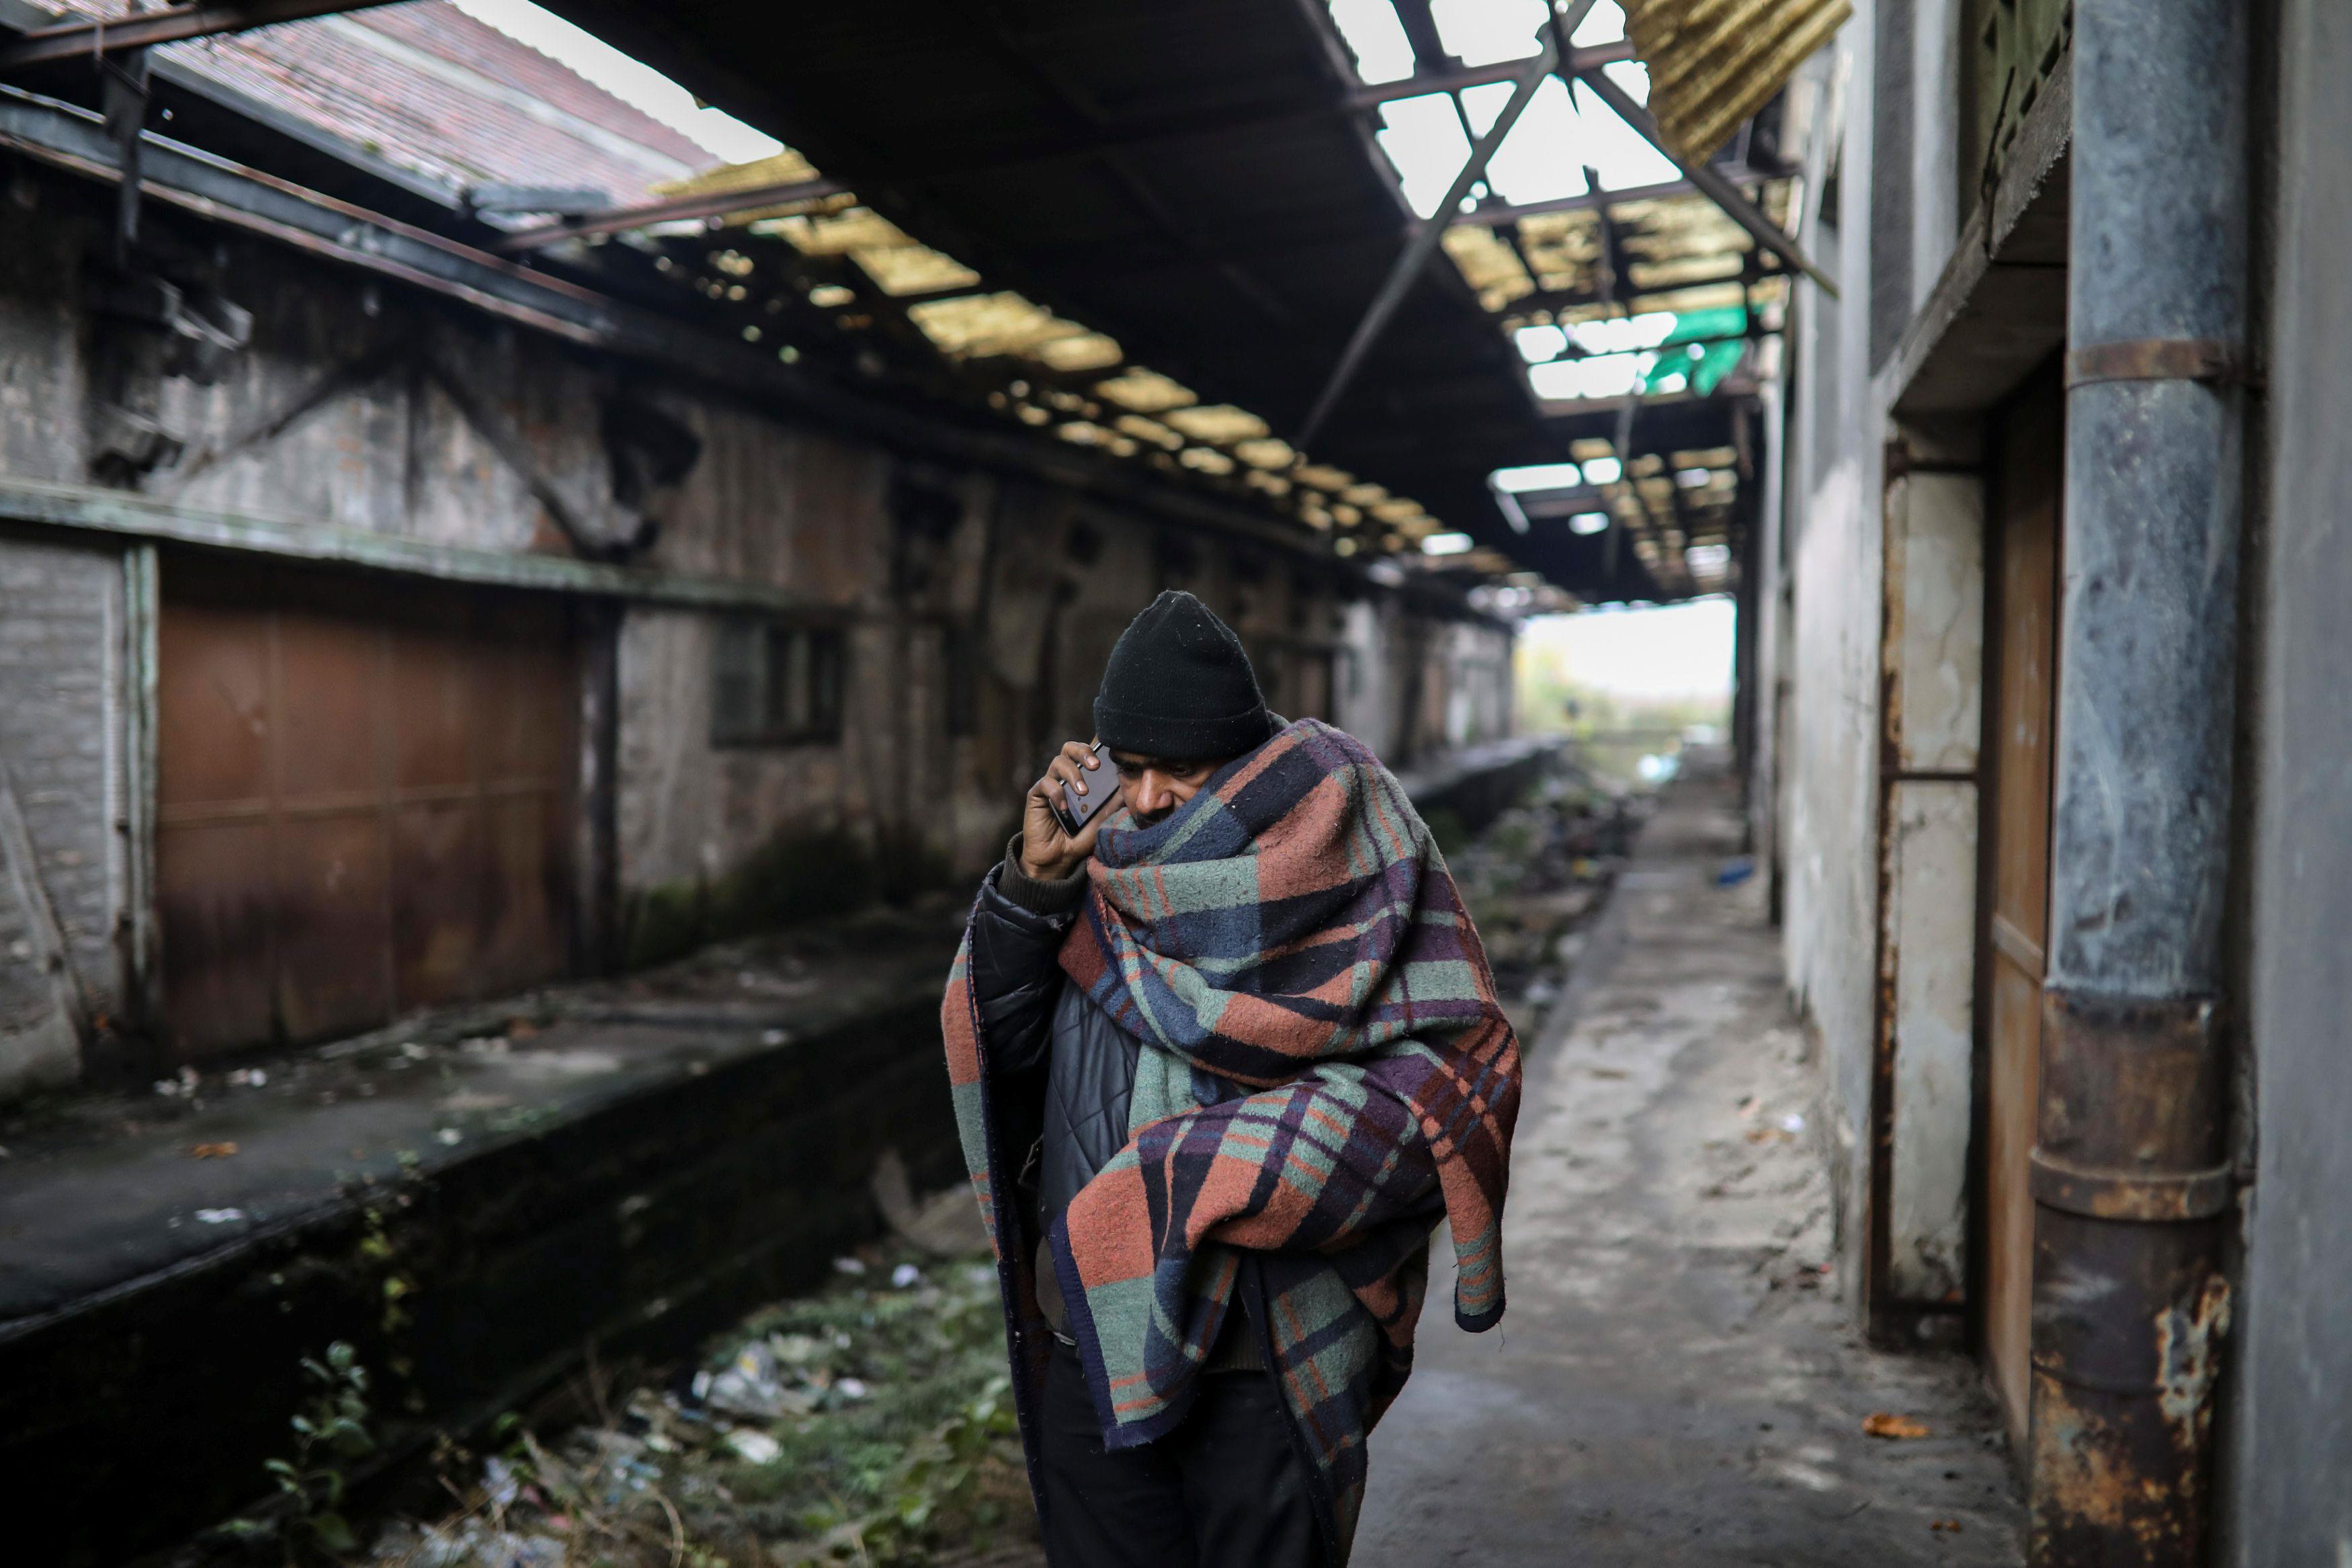 The Wider Image: Trapped in Serbia, migrants shelter in warehouse